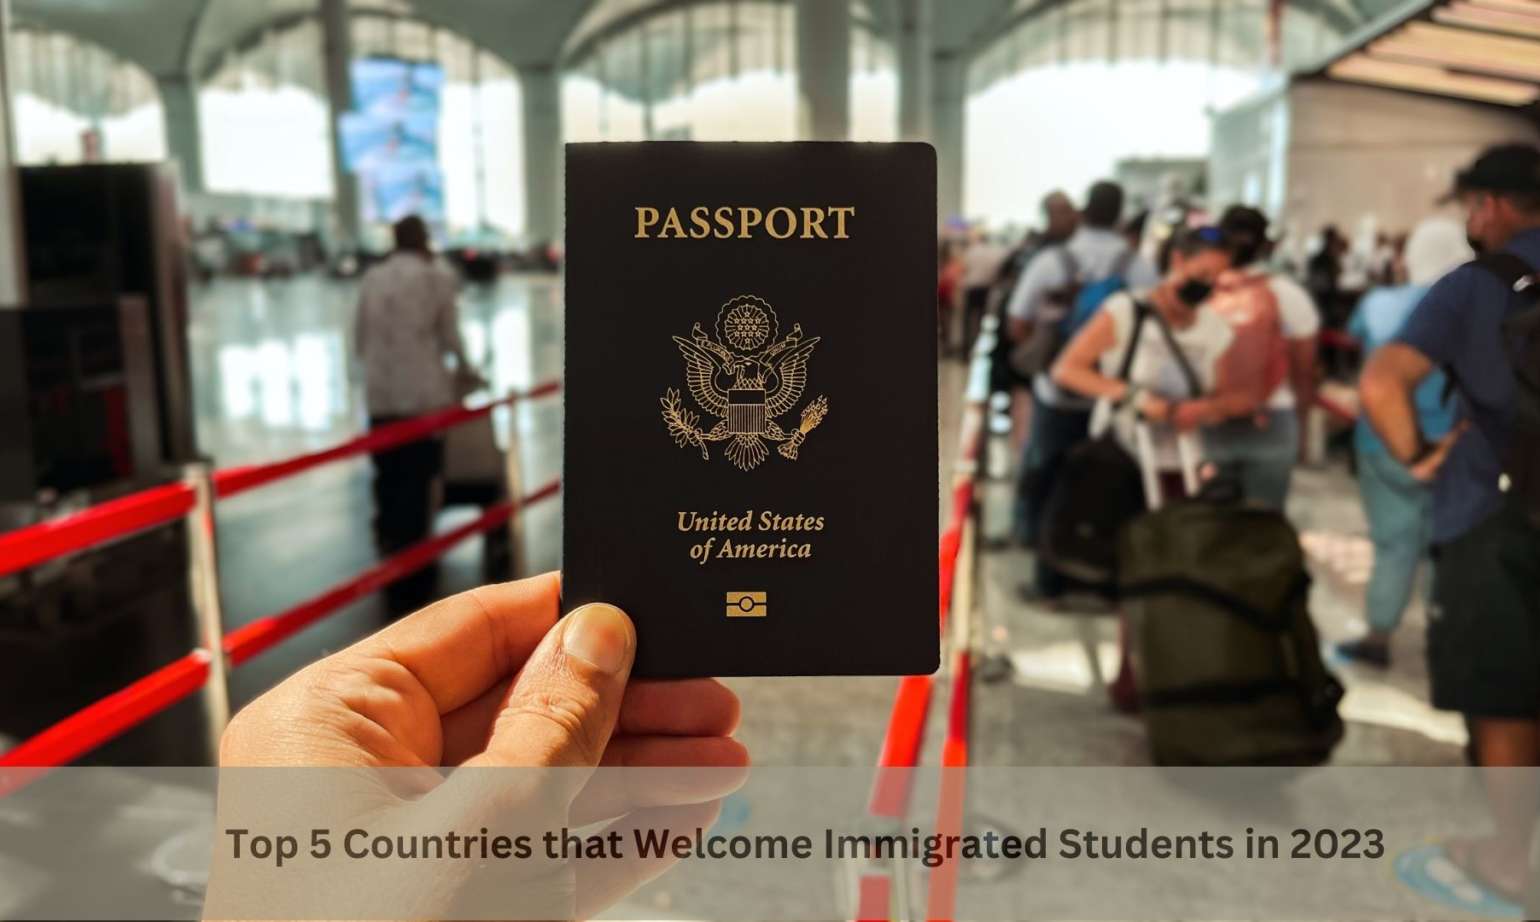 Top 5 Countries that Welcome Immigrated Students in 2023